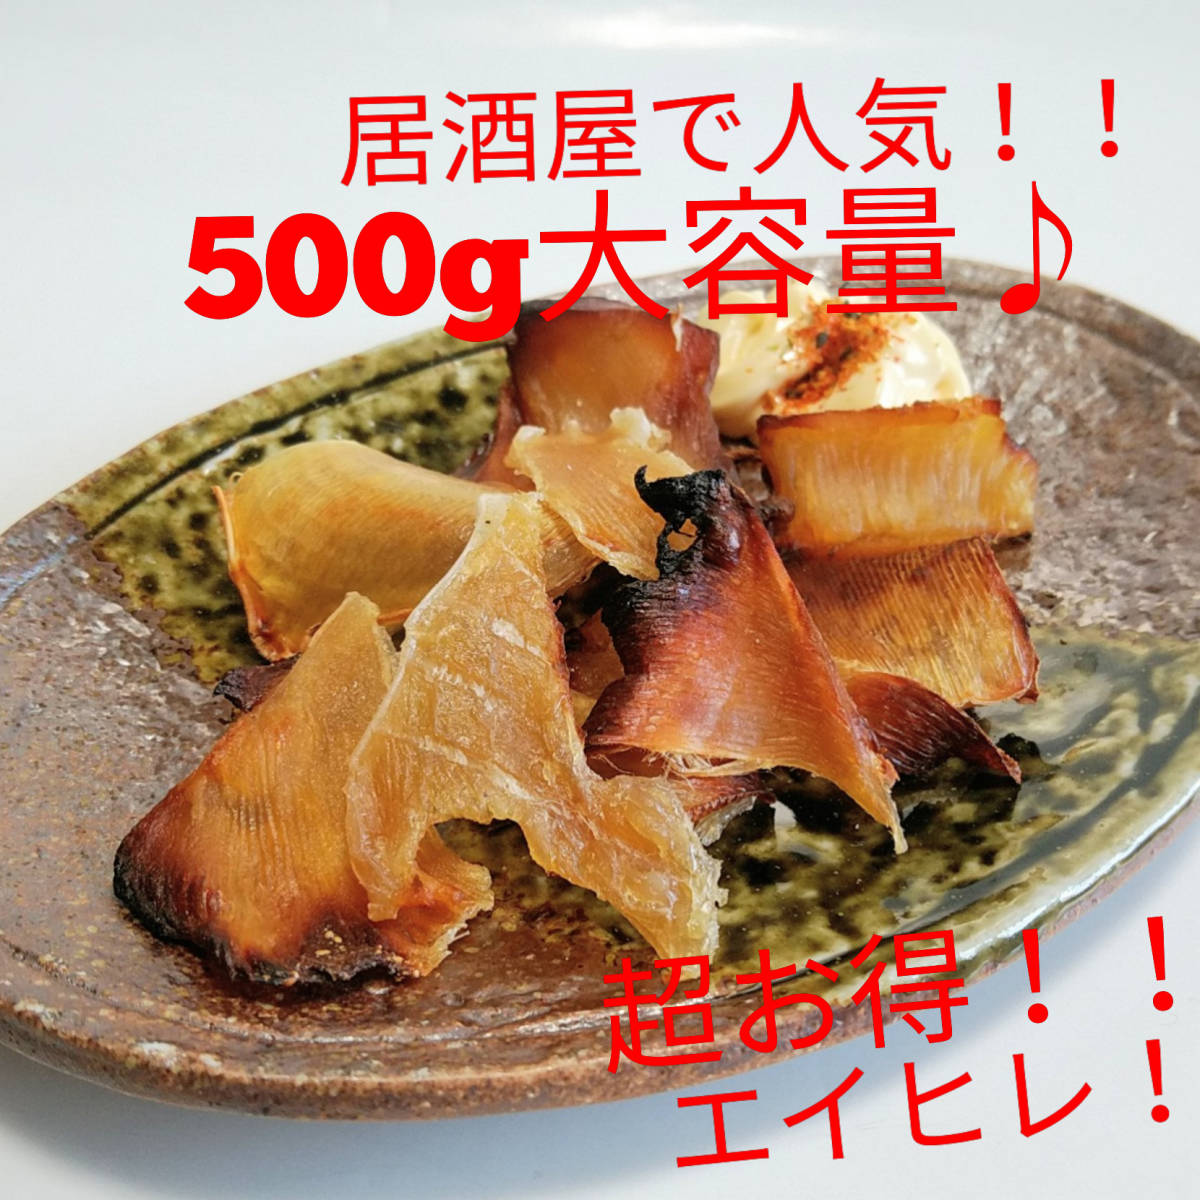  house ... exactly![ business use meat thickness ....] taste attaching enough 500g sack go in izakaya pub menu / super-discount / safe . wholesale store exhibition / sake. . optimum /../ snack 